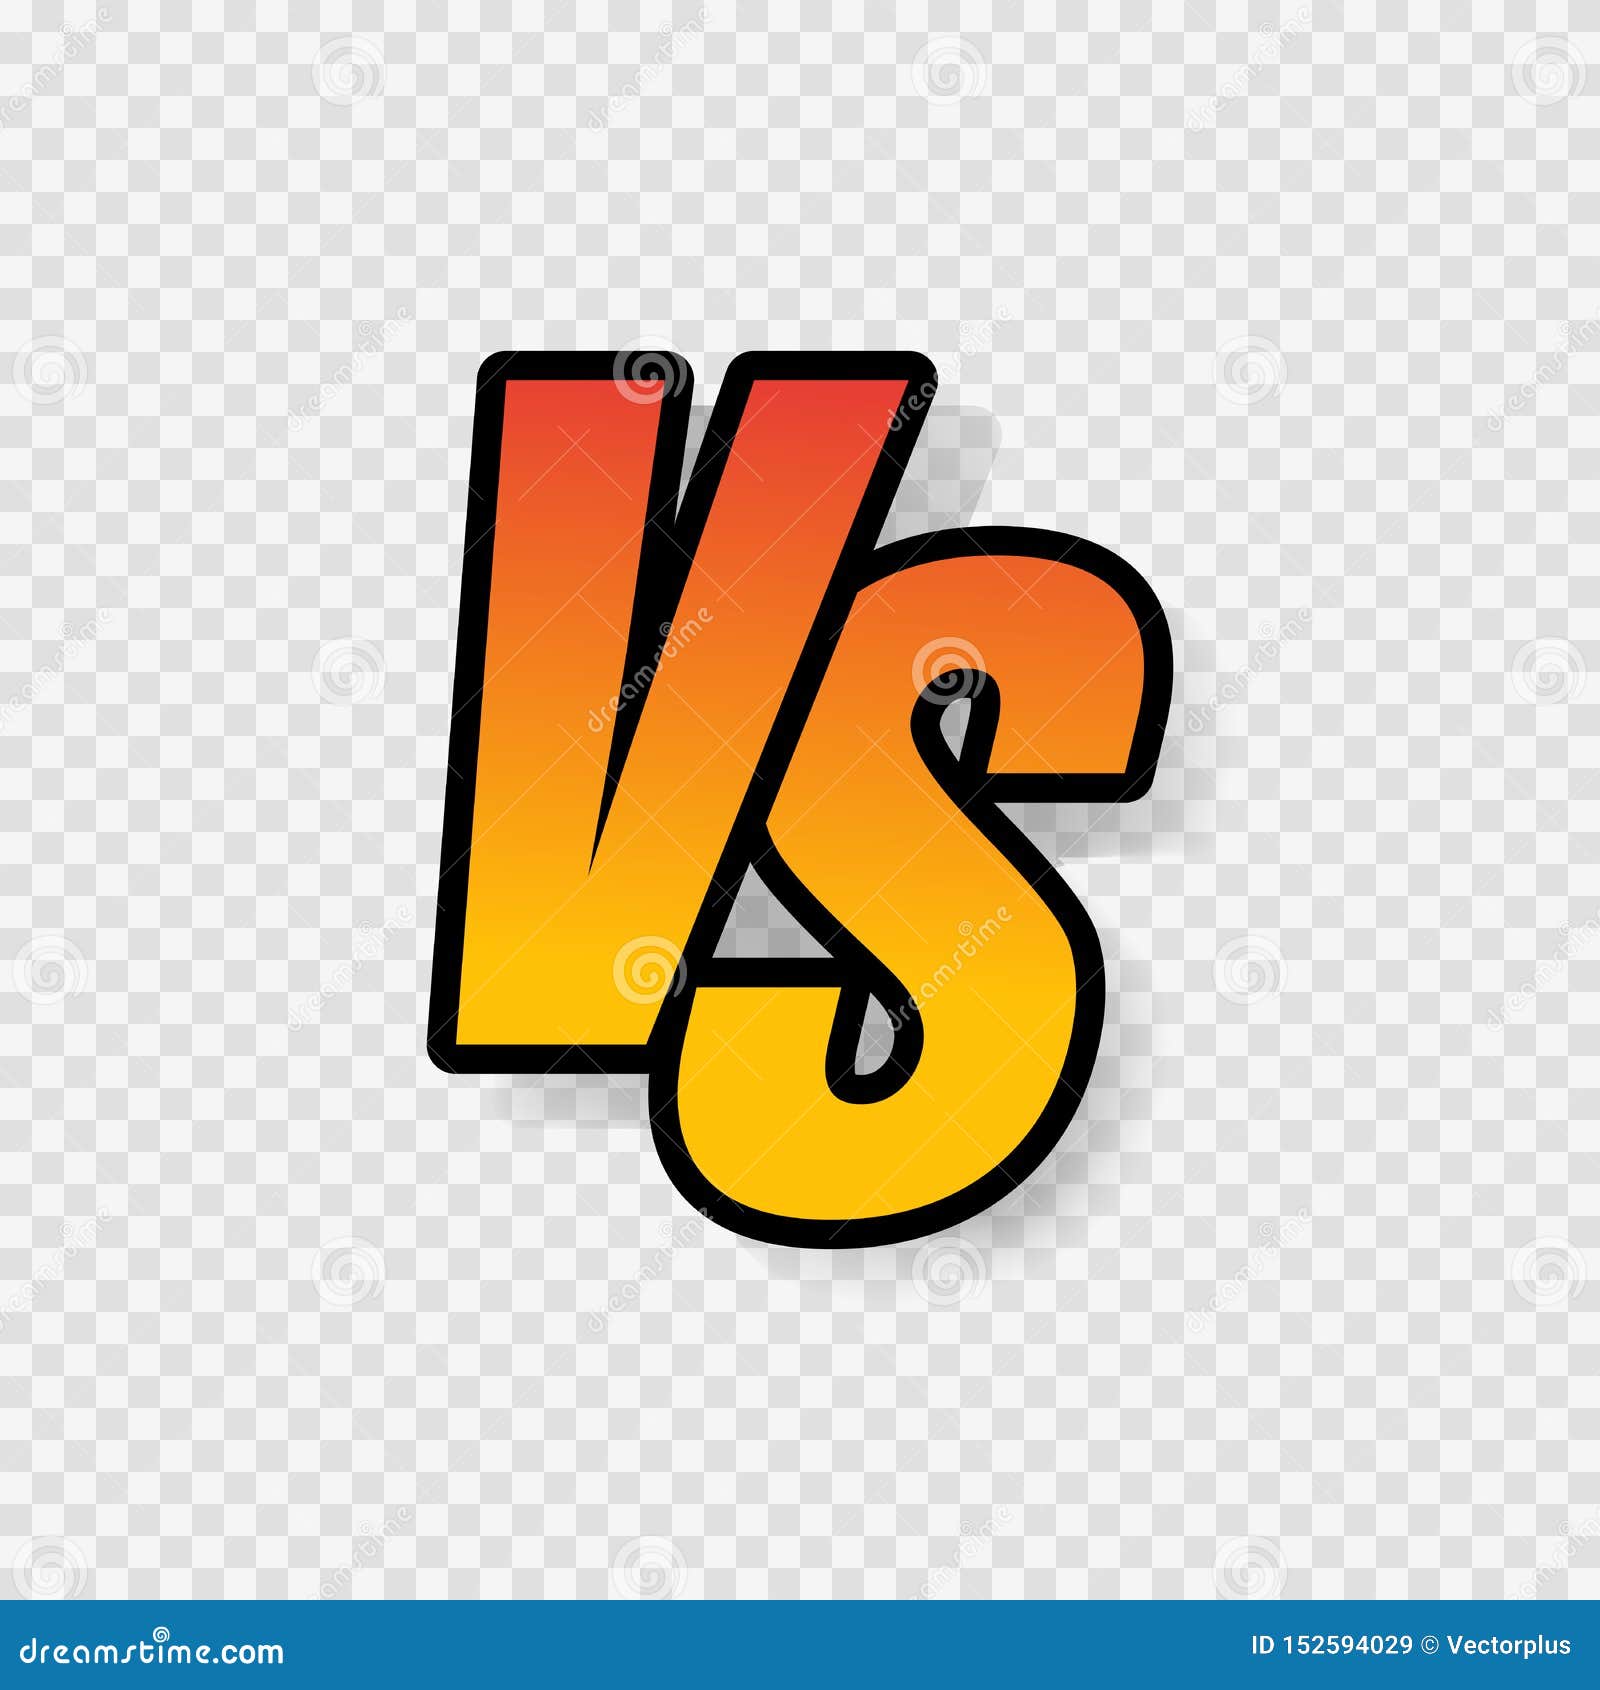 Vs Letters or Versus Logo Vector Sign Isolated on Transparent Background  Stock Illustration - Illustration of concept, action: 152594029